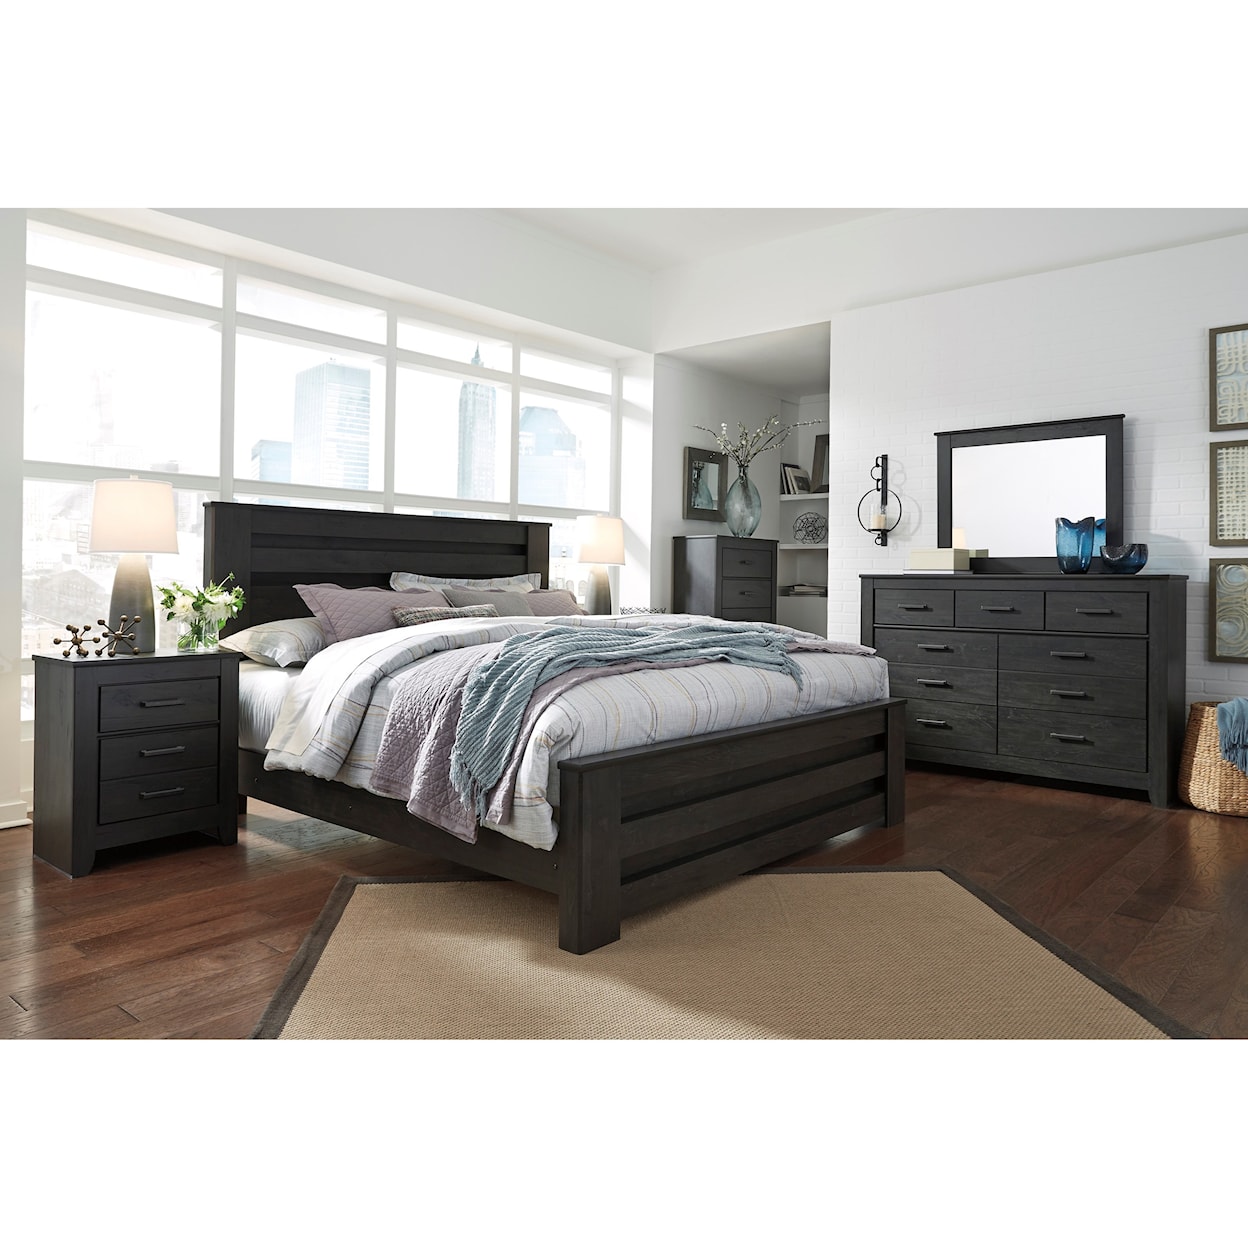 Signature Design by Ashley Brinxton King Bedroom Group